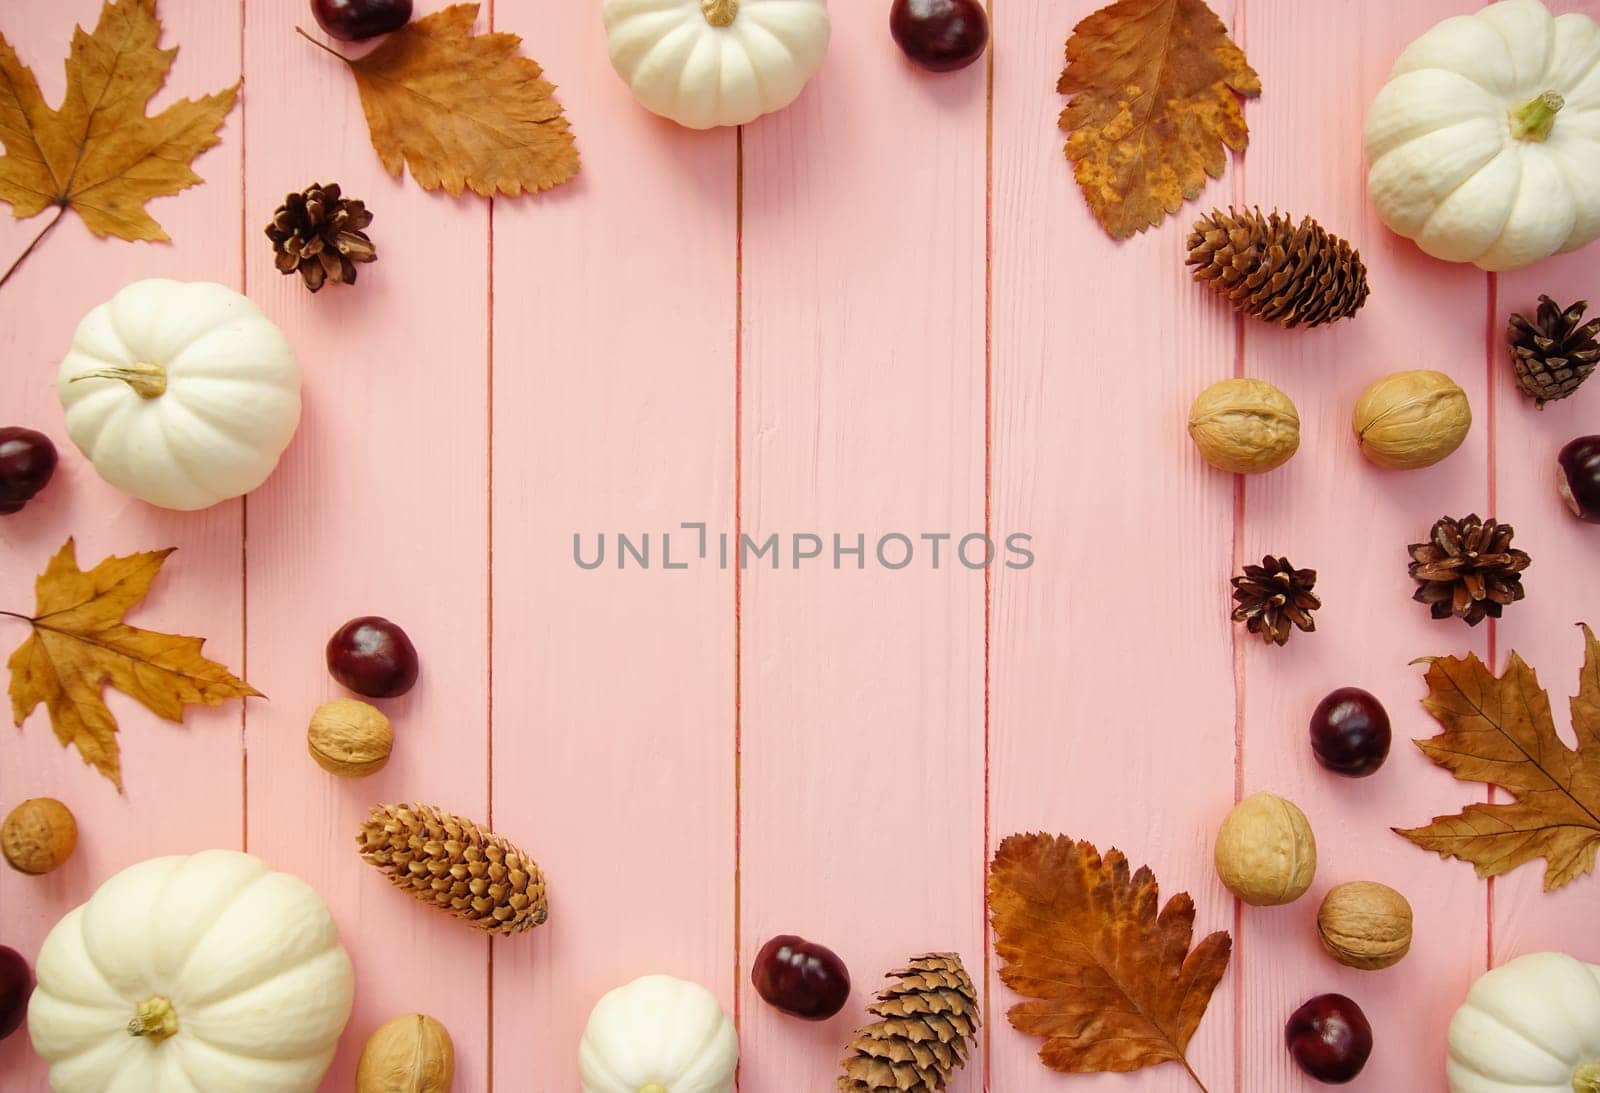 Elements of autumn decor are laid out on a pink background - white decorative pumpkins, yellow leaves, walnuts and chestnuts